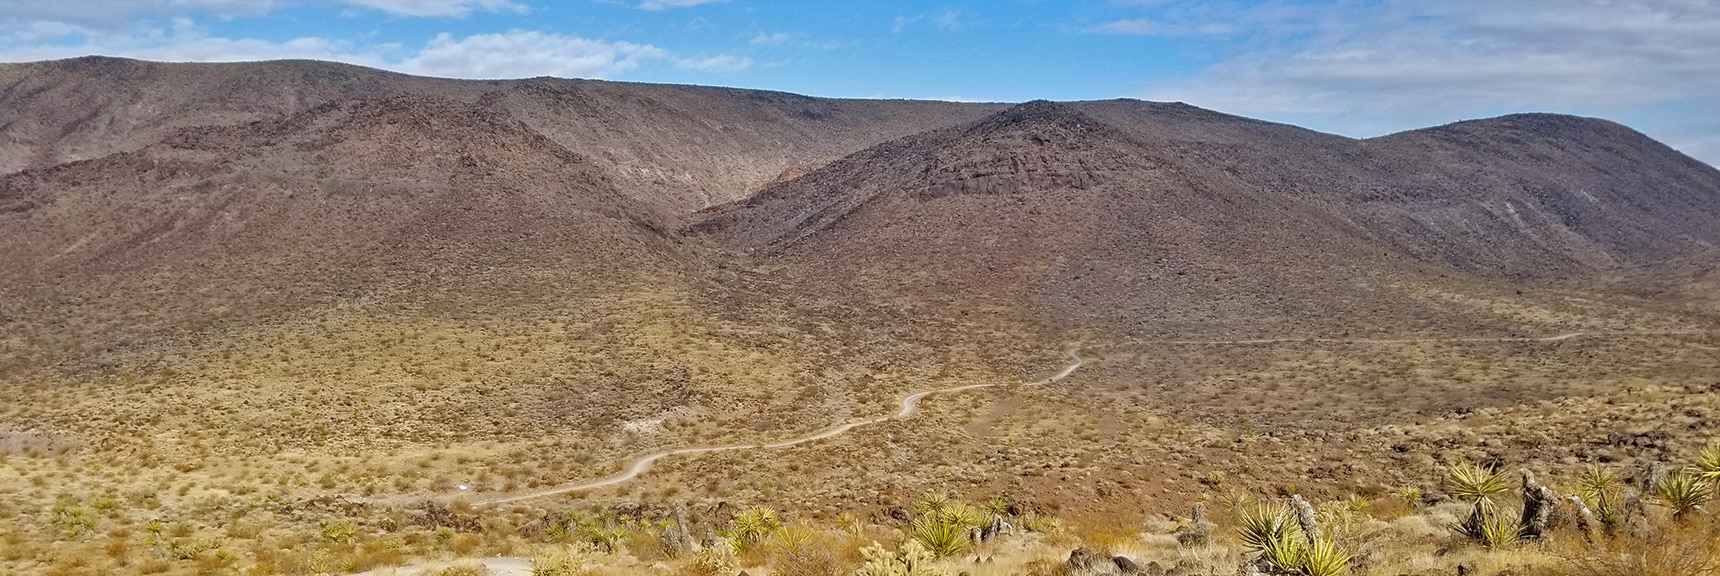 Looking Back Down the Trail Toward the Trailhead. Have Gained a Lot of Elevation! | McCullough Hills Trail in Sloan Canyon National Conservation Area, Nevada